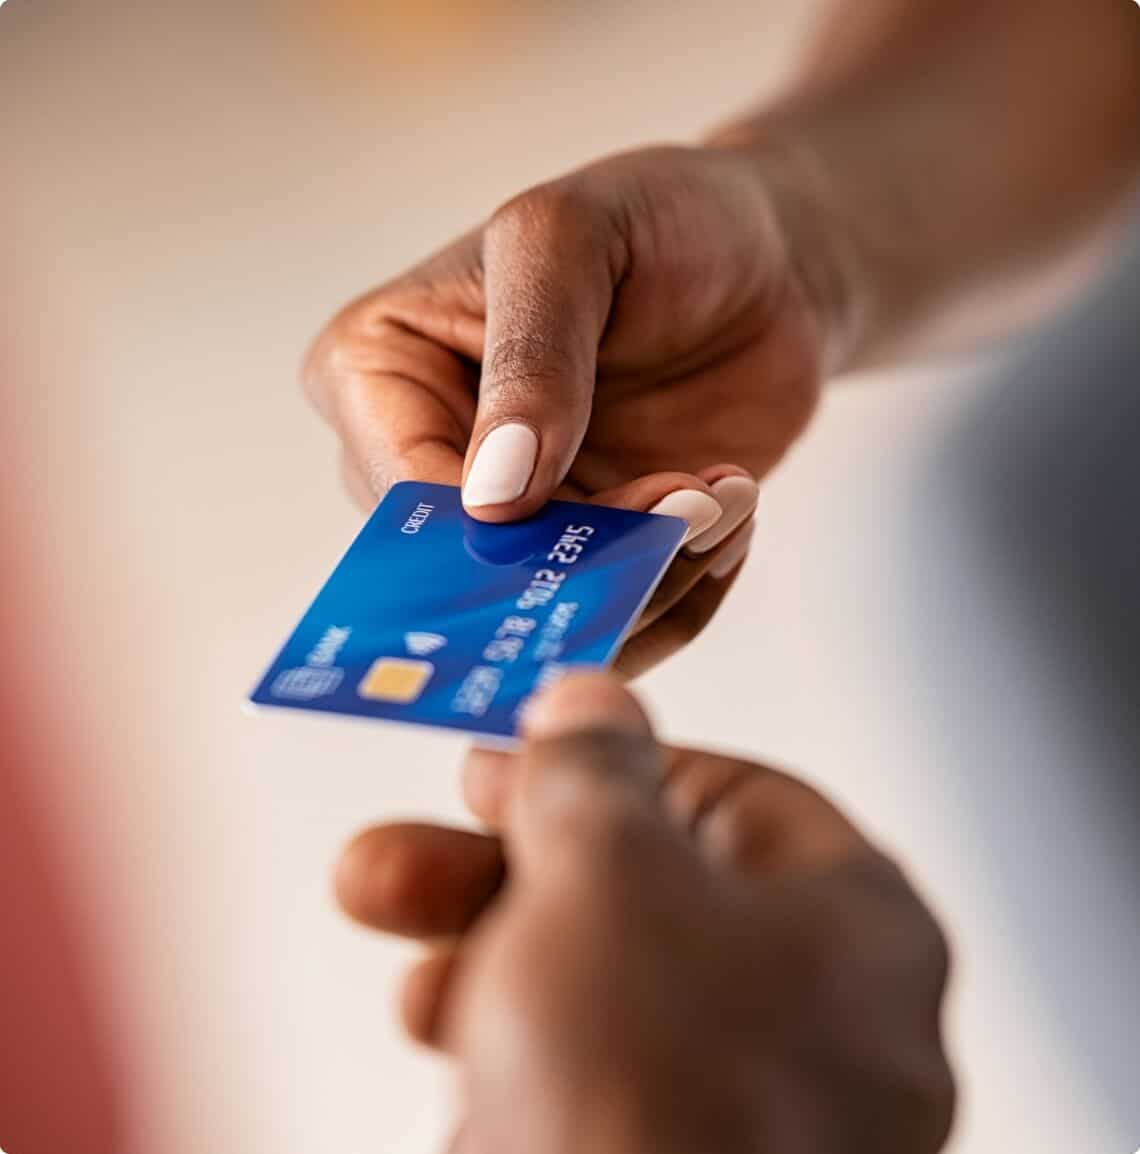 Close up of someone holding a credit card